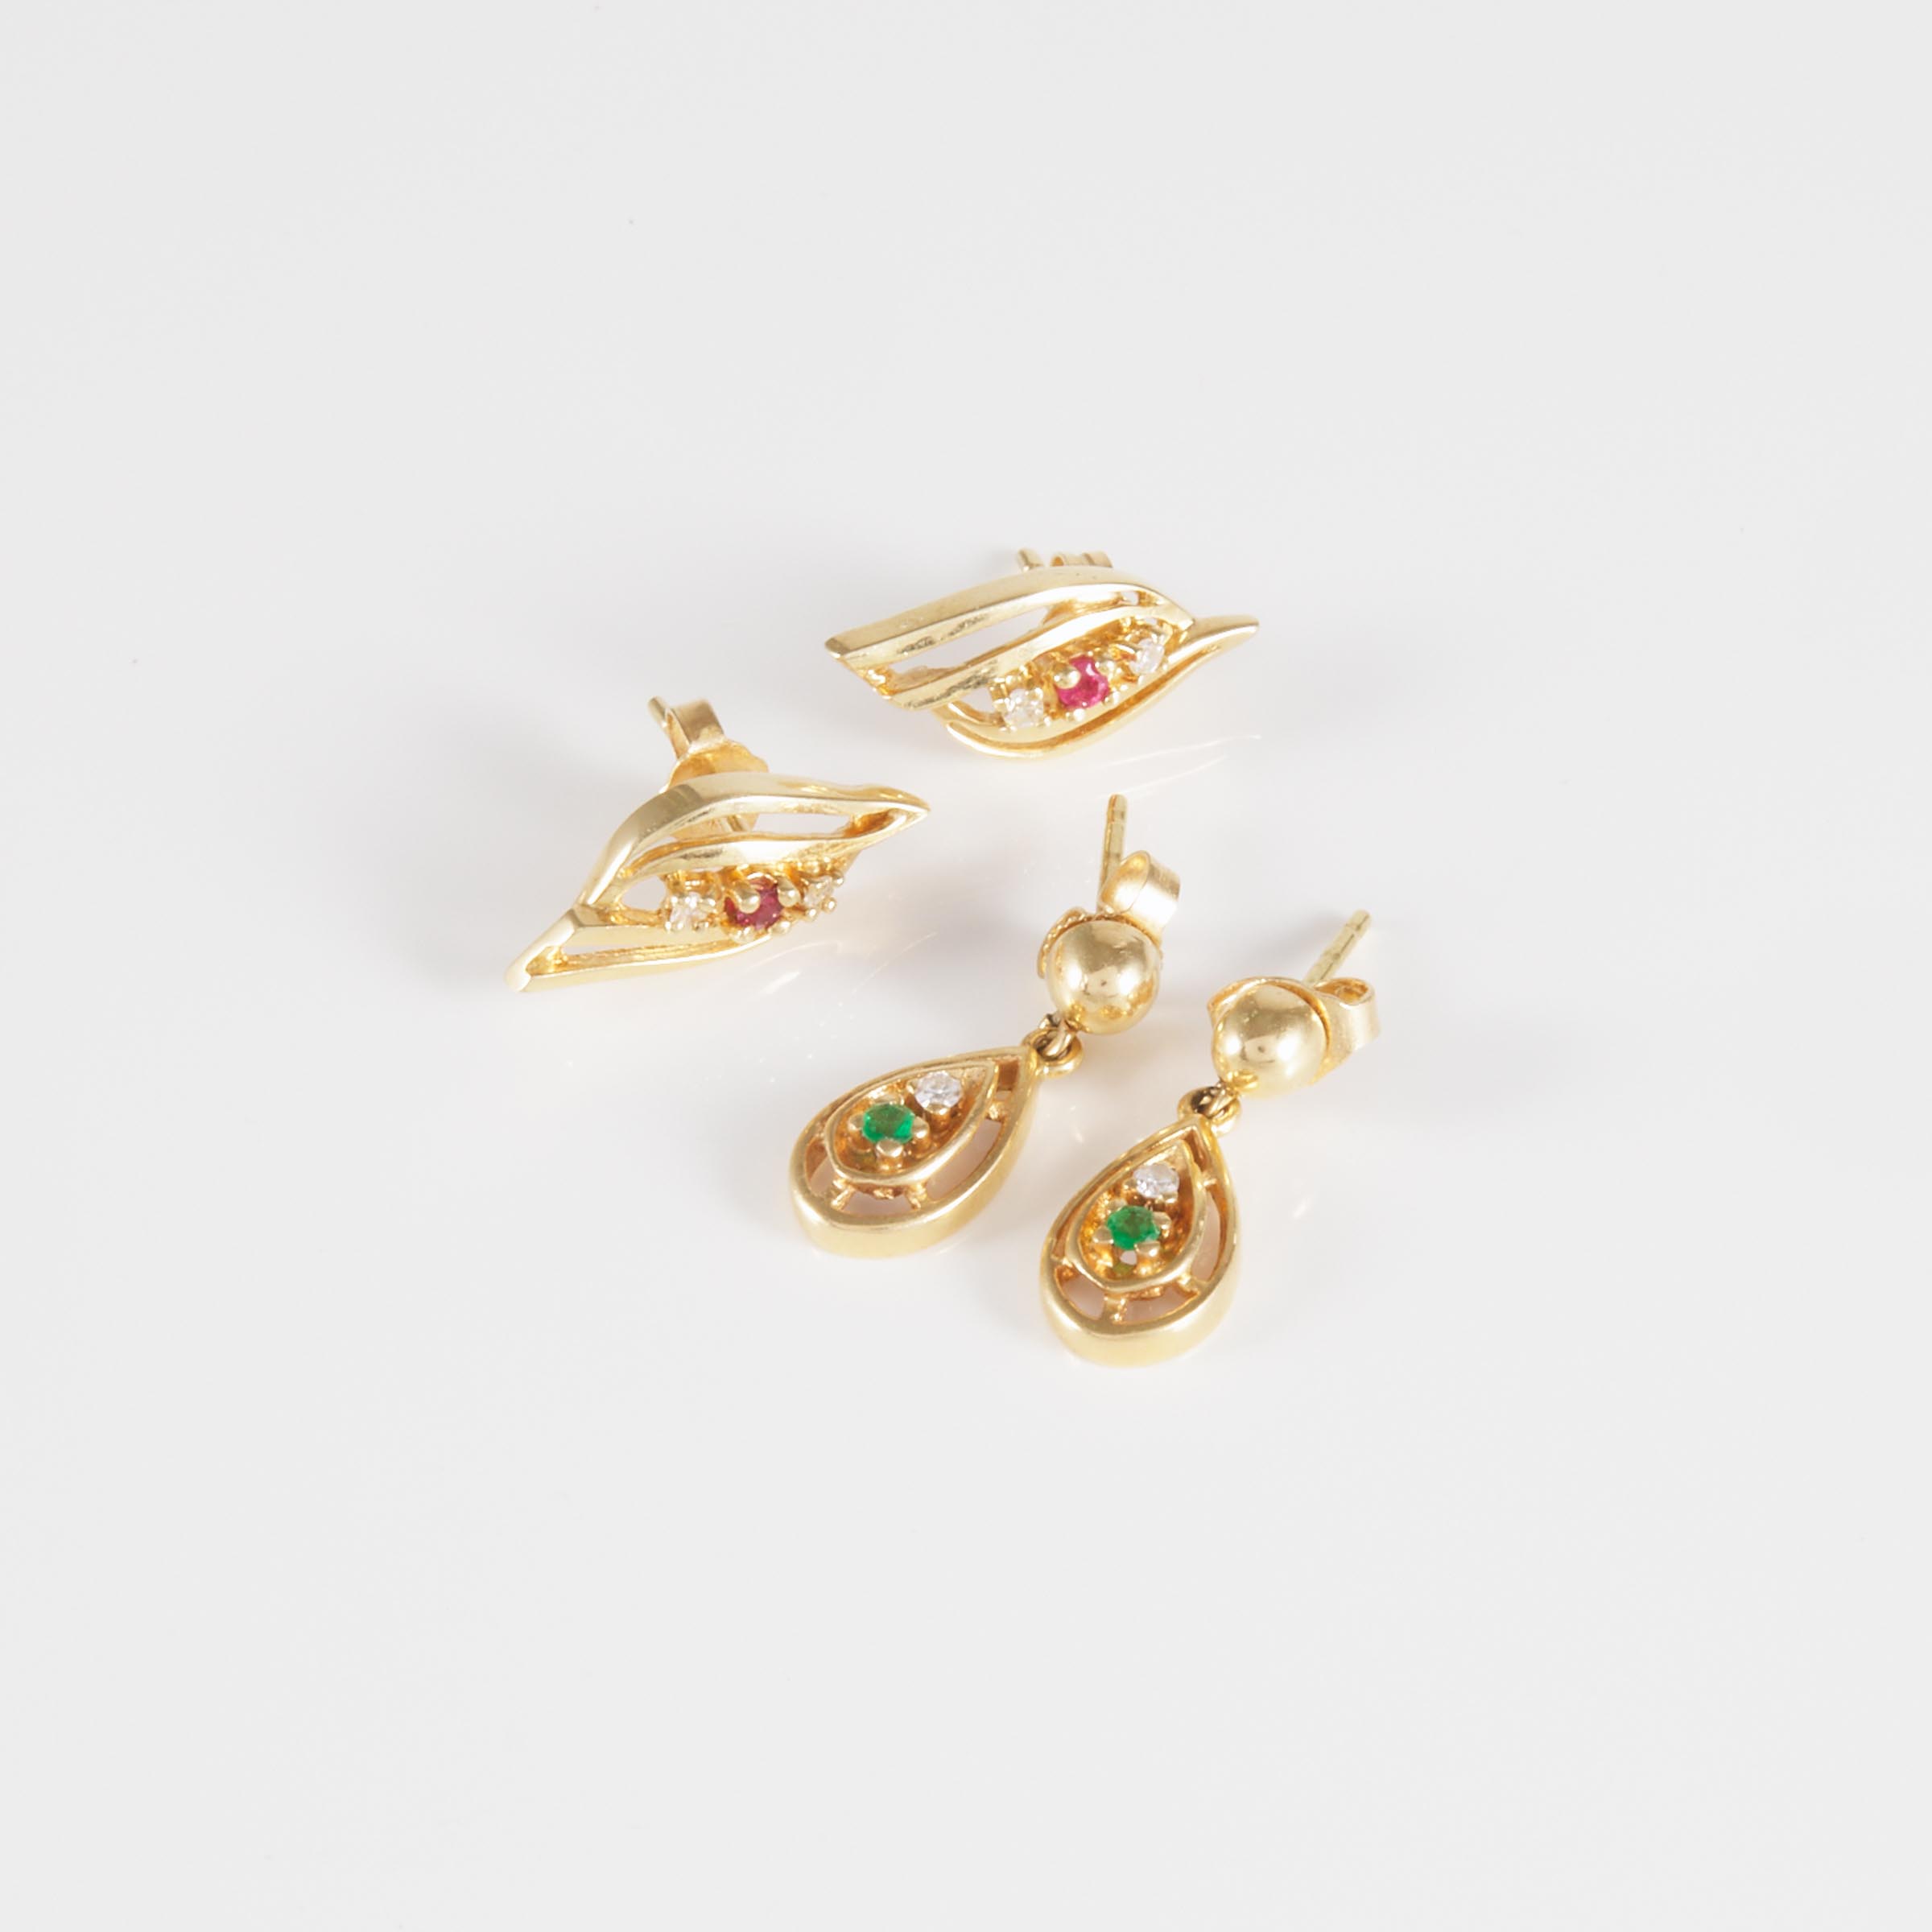 2 Pairs Of 14k Yellow Gold Earrings set with small rubies, emeralds and diamonds